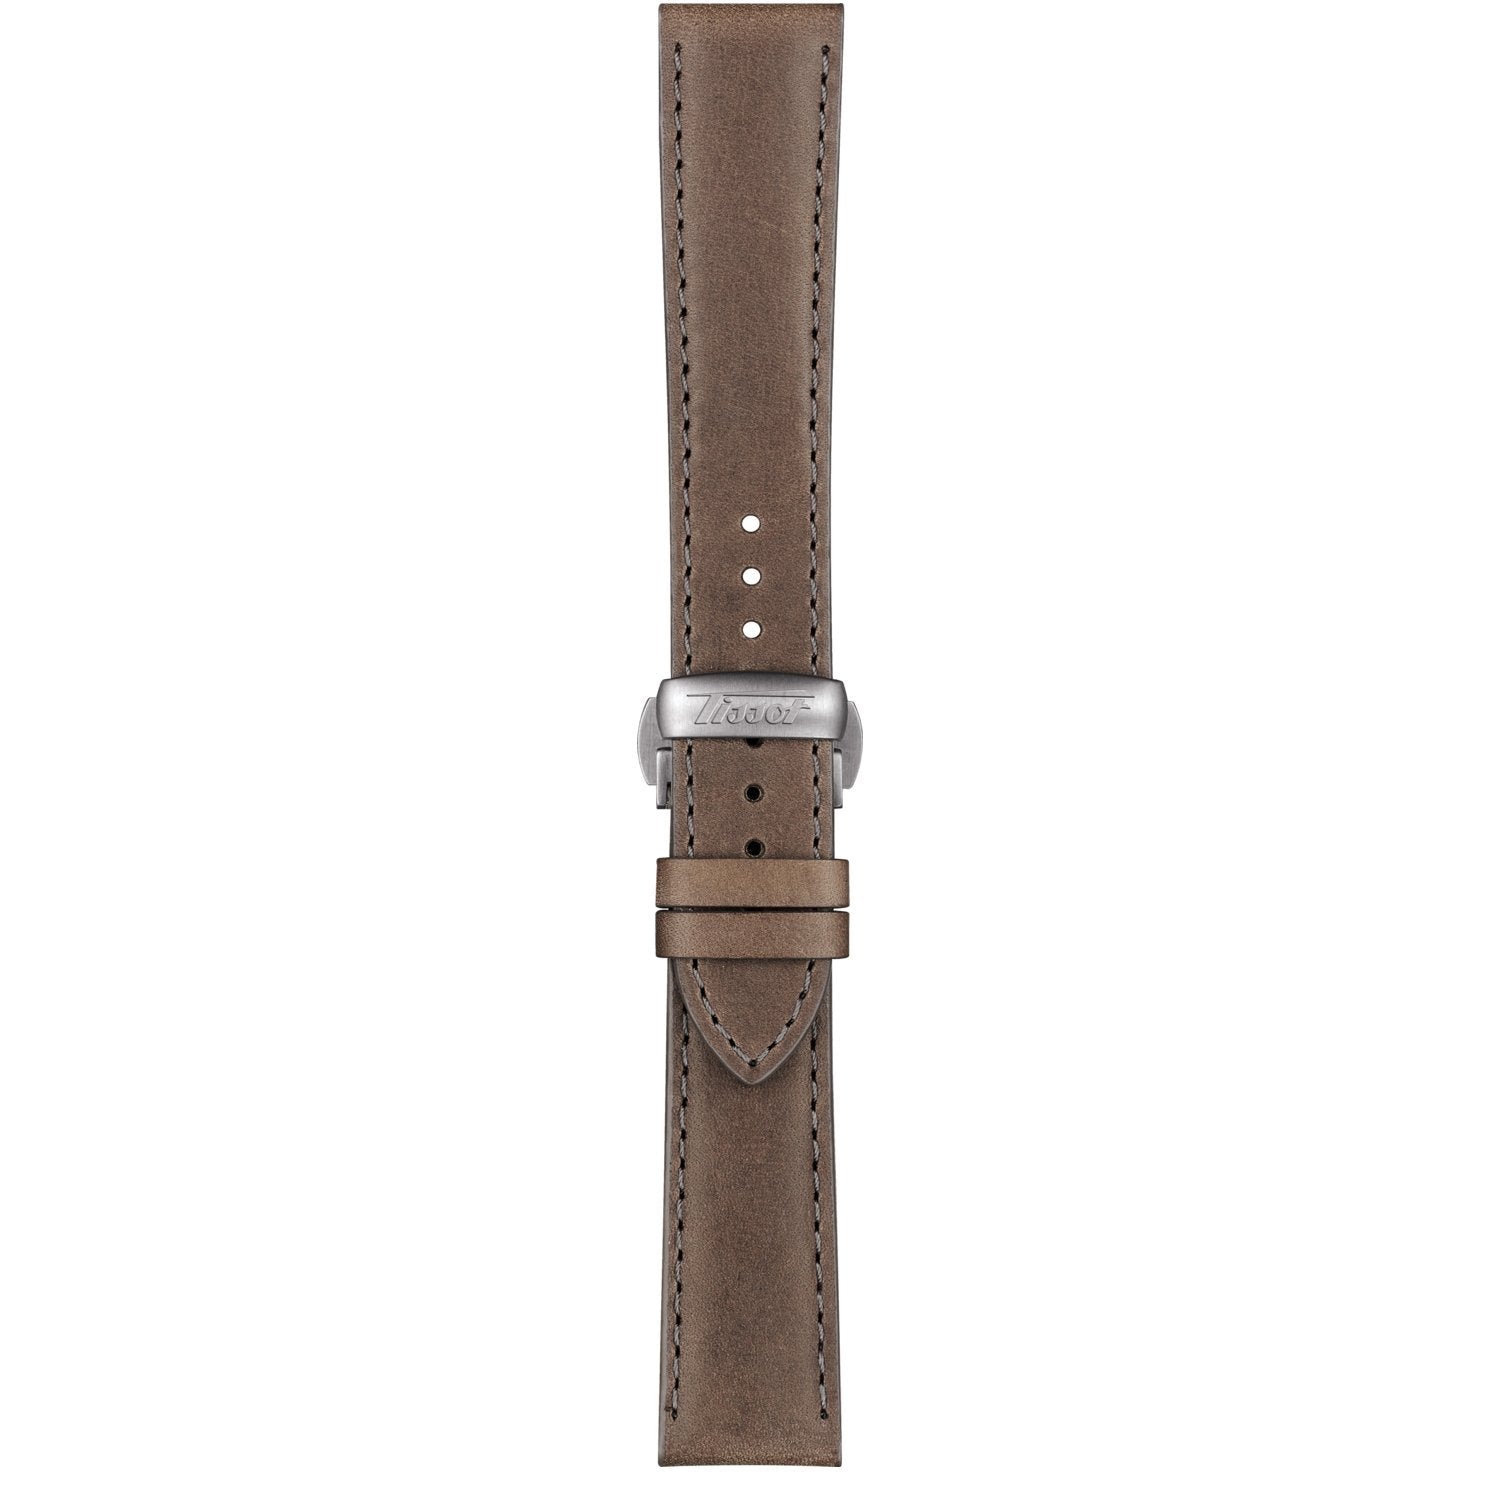 Genuine Tissot 20mm Heritage Brown Leather Strap by Tissot